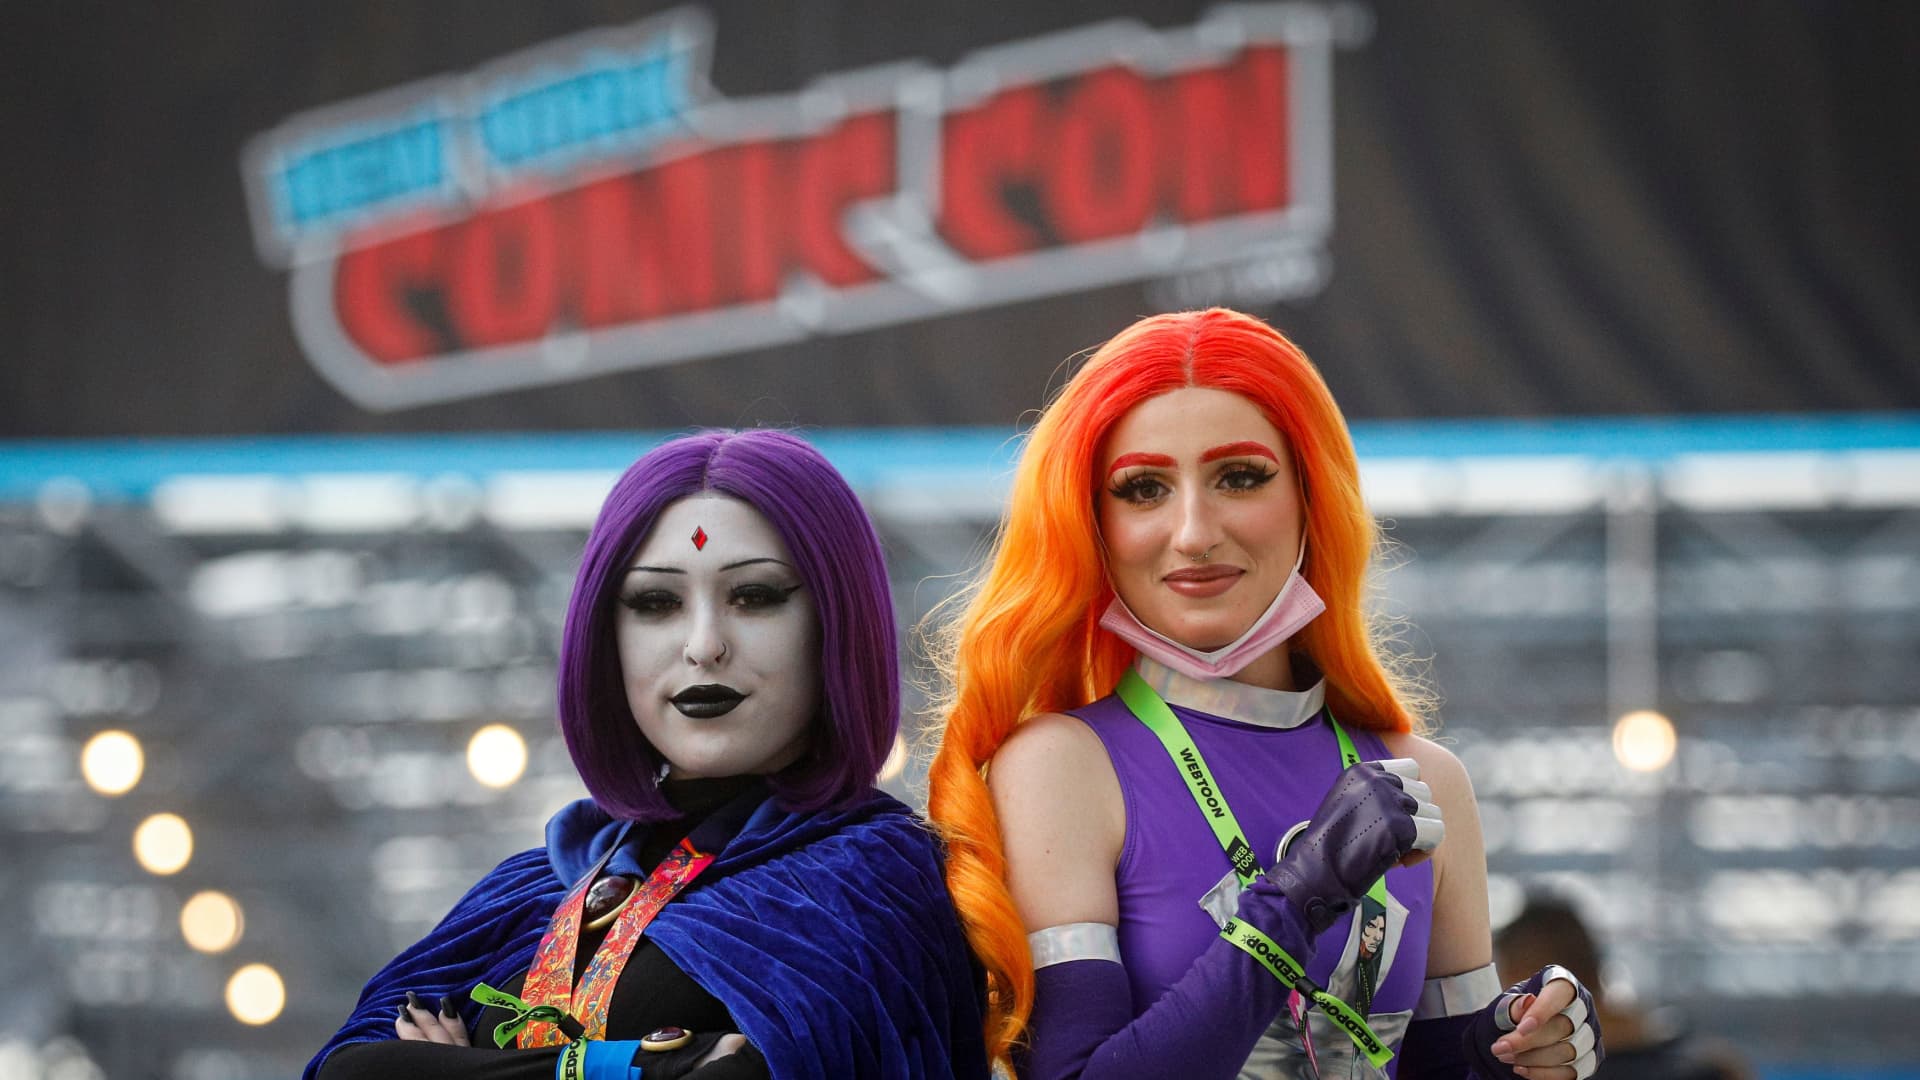 Women in costume pose together at the 2021 New York Comic Con,at the Jacob Javits Convention Center in Manhattan in New York City, New York, U.S., October 7, 2021.